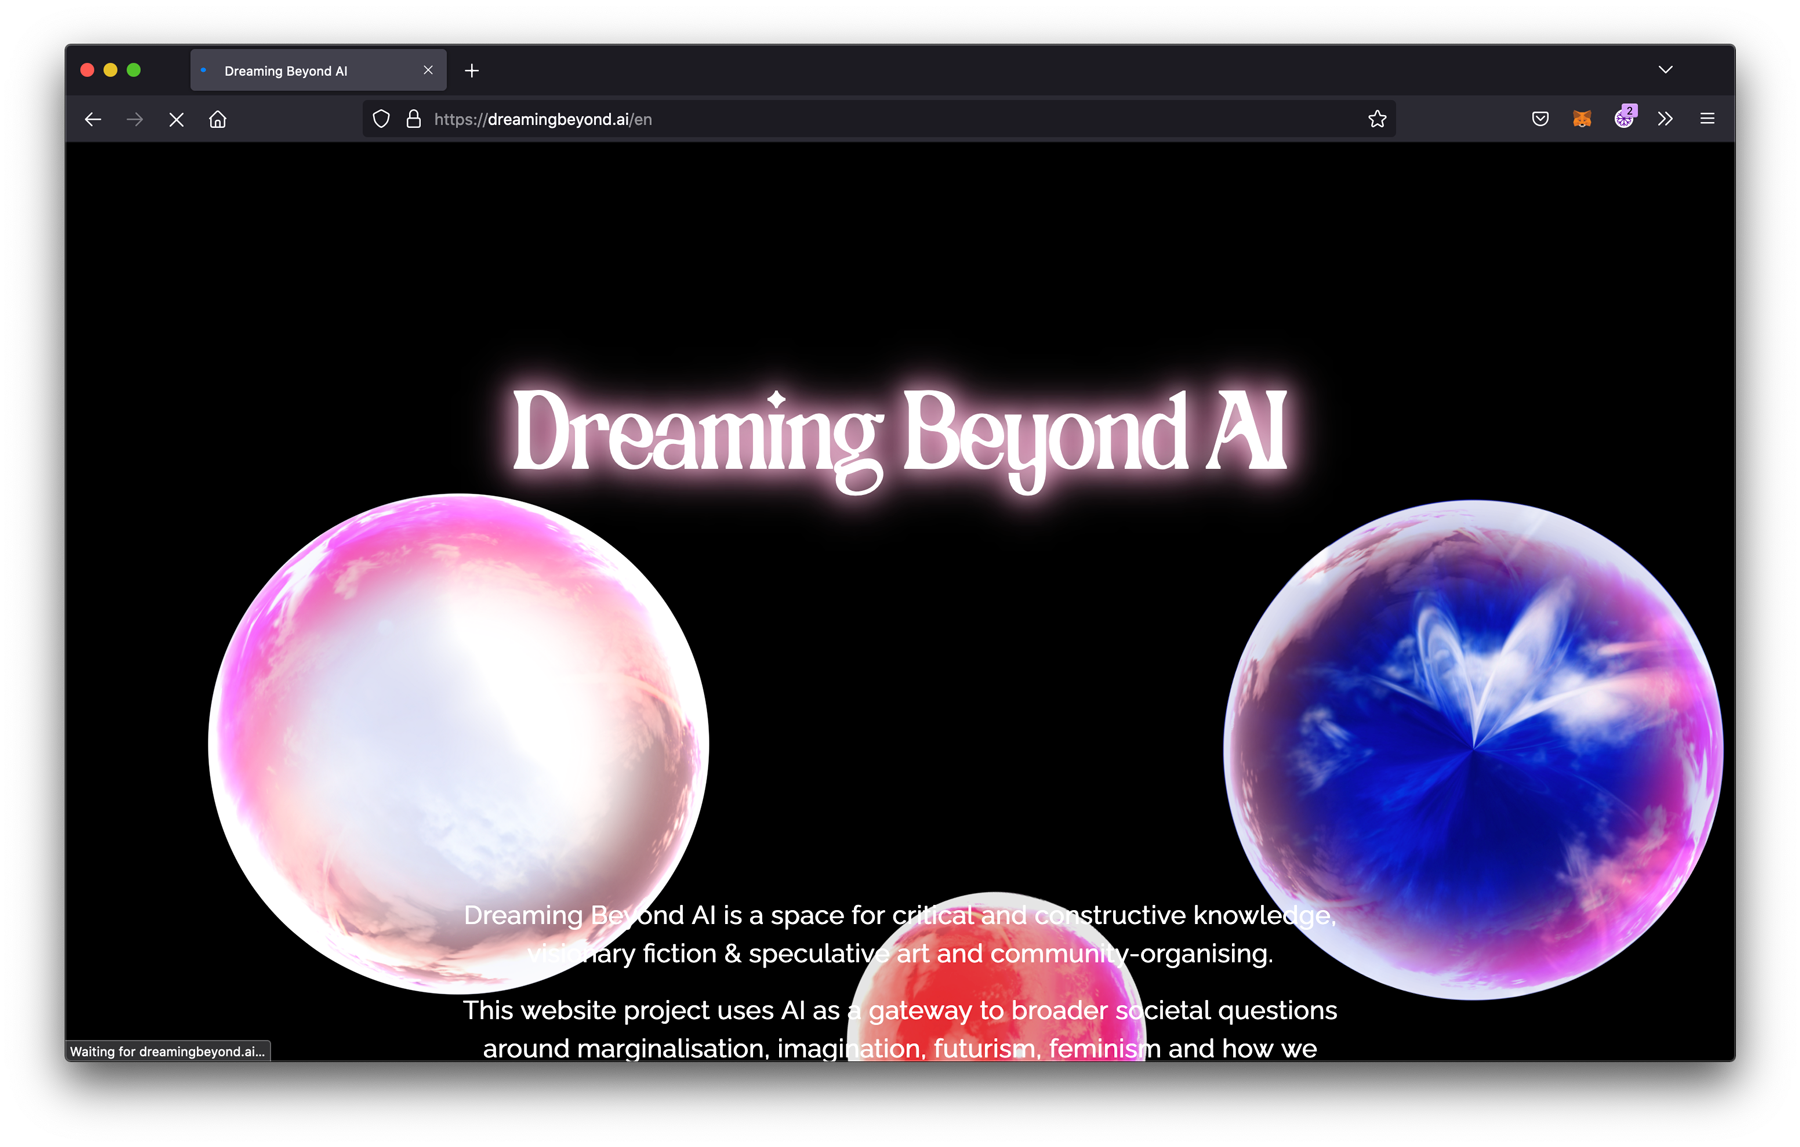 black website screenshot with floating glowing orbs in pink and blue and a pink glowing title that reads “Dreaming Beyond AI”